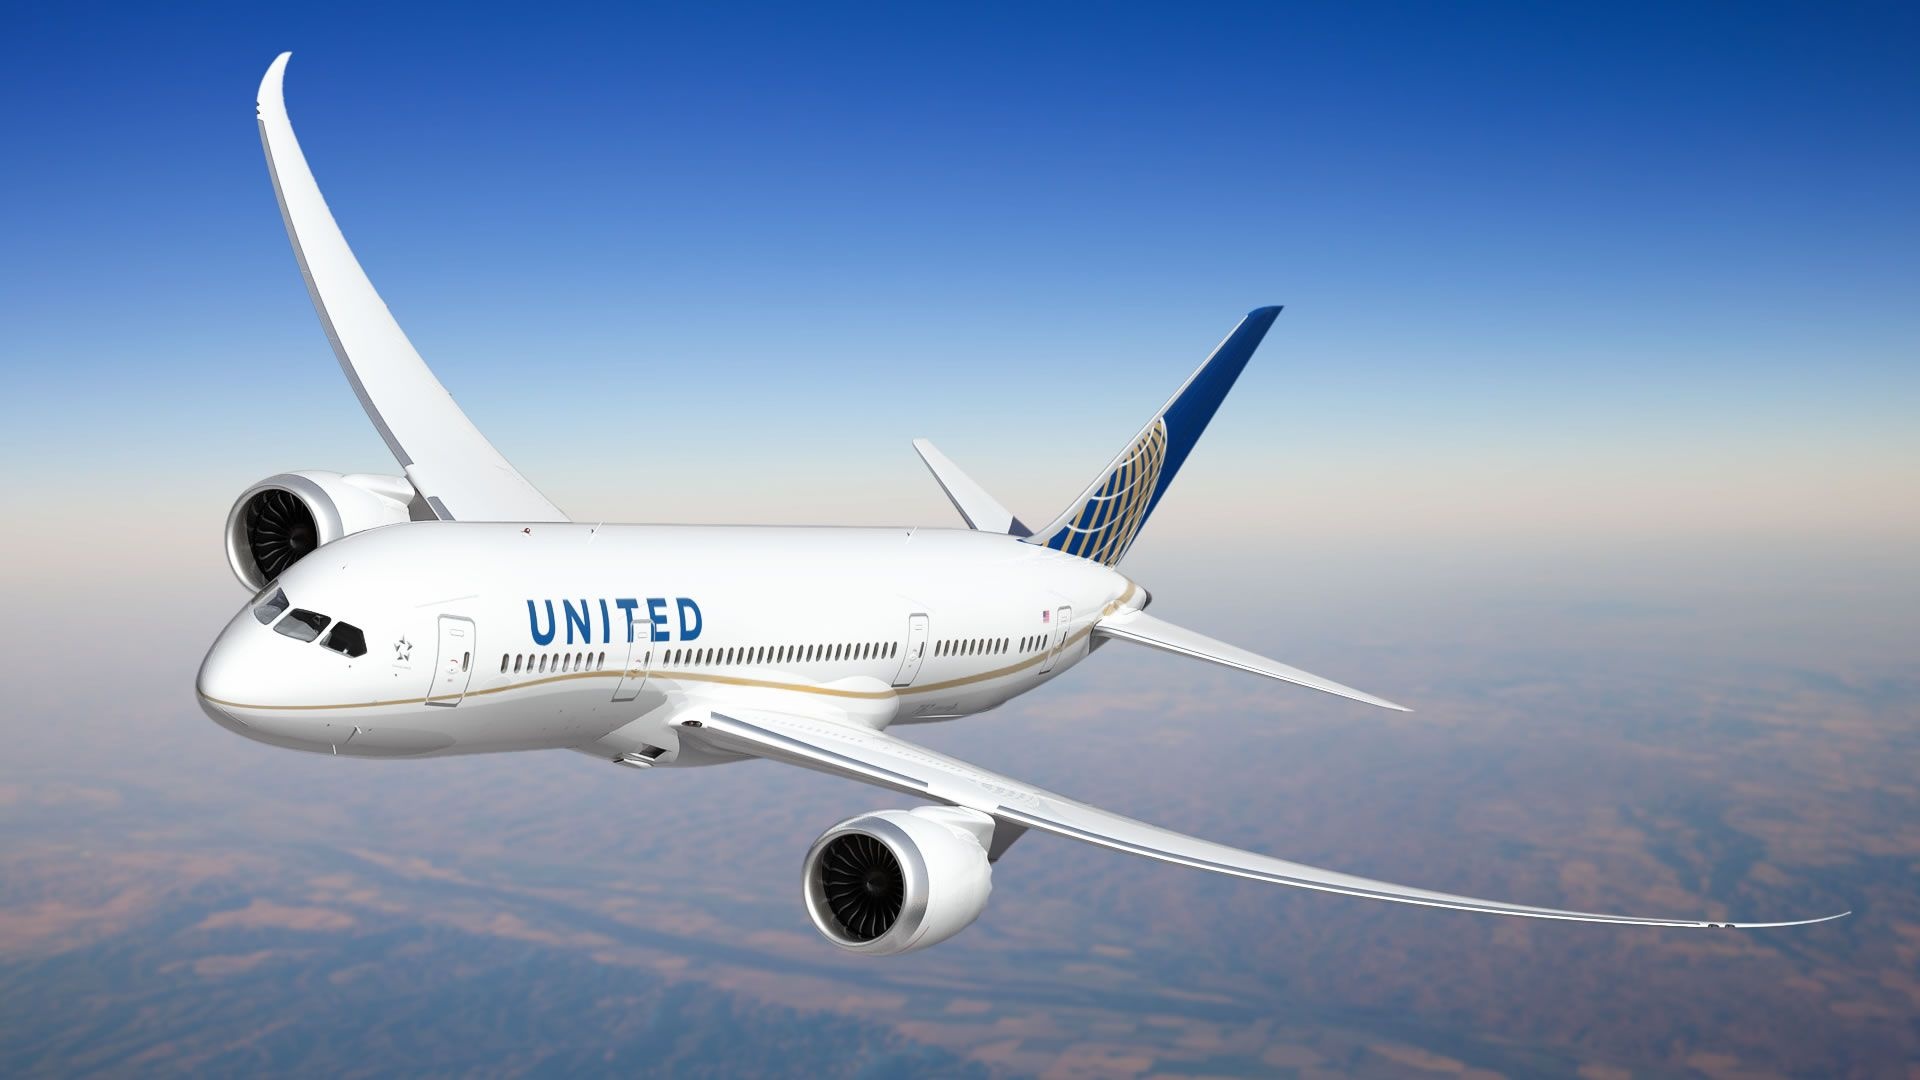 United Airlines, Top free backgrounds, Airline wallpapers, Travel with United, 1920x1080 Full HD Desktop